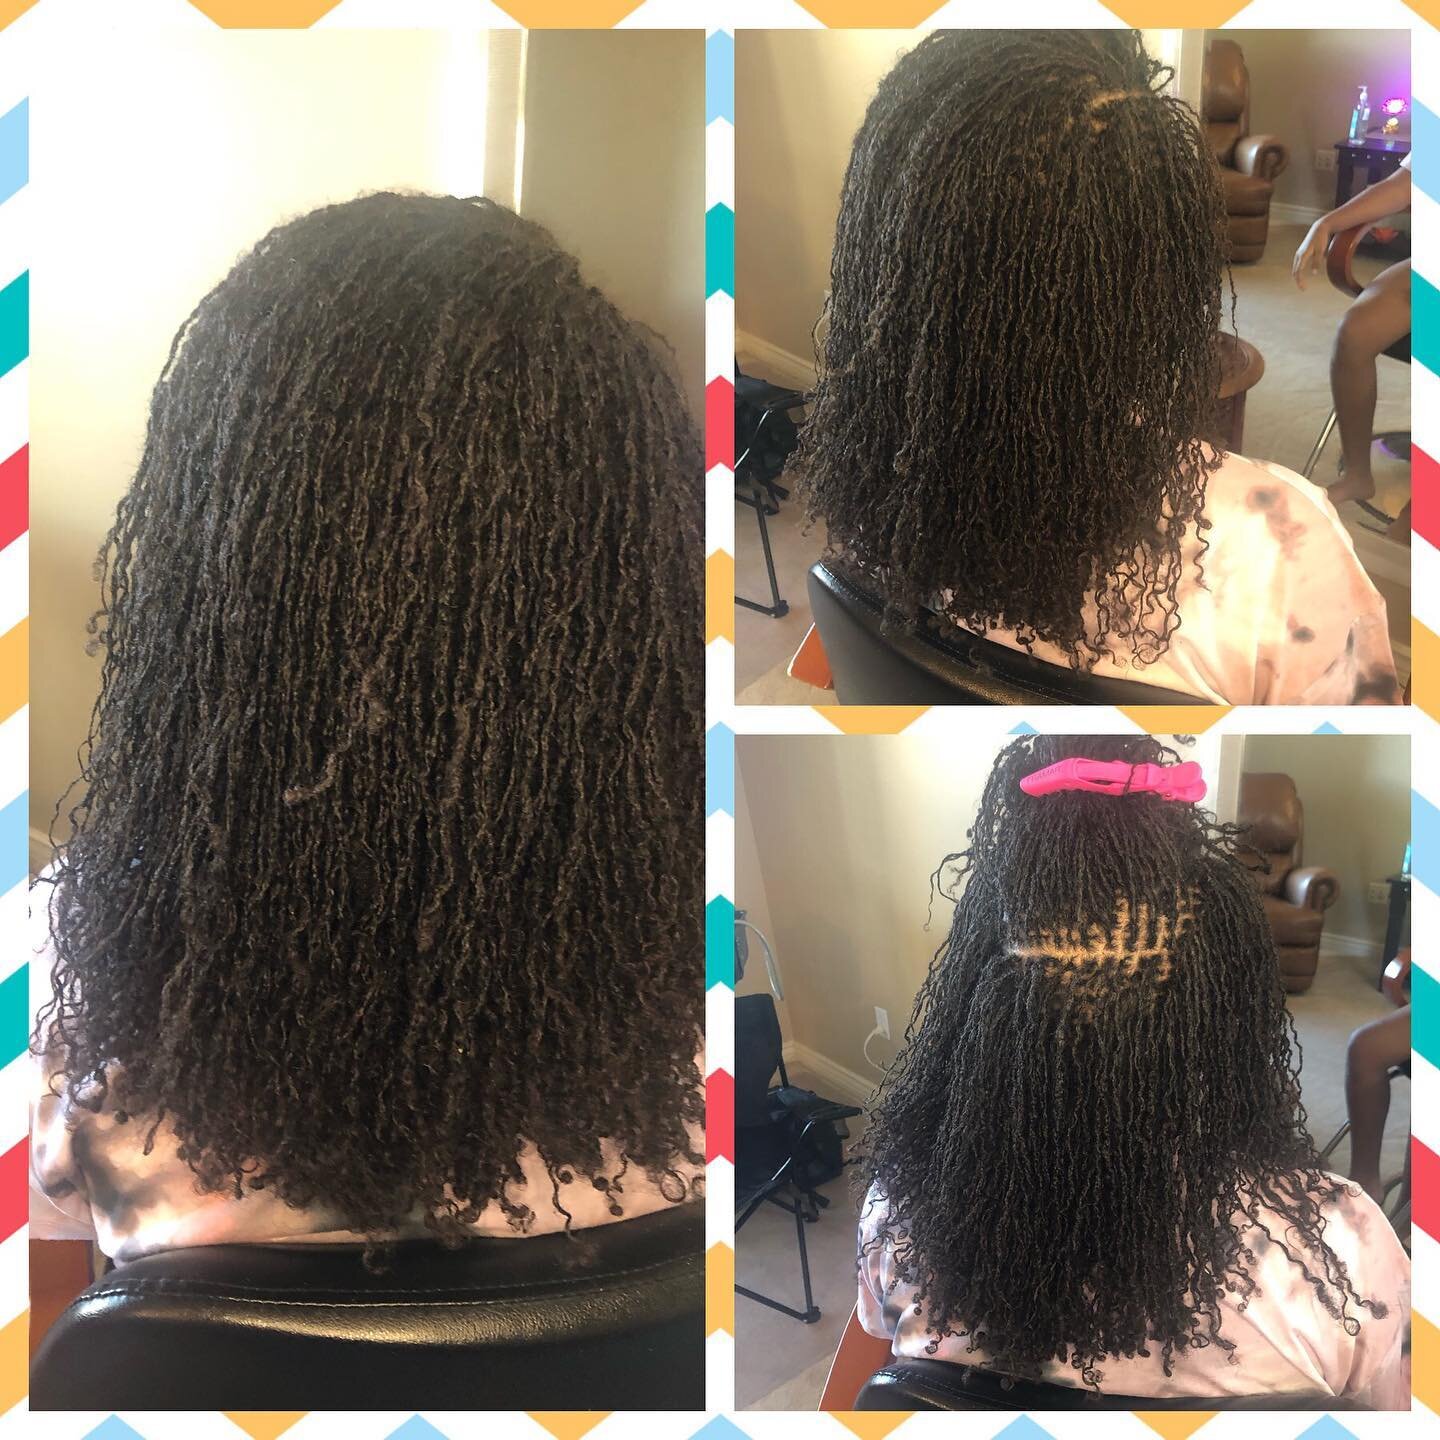 This is about 9months in. She had a lot of hair🤣🤣🤣. She was 12 when we started. 13 years old now 😃. #sisterlockkids #arizonasisterlocks #sisterlocksphoenix #naturalhairphoenix #sisterlocksaz #sisterlocs